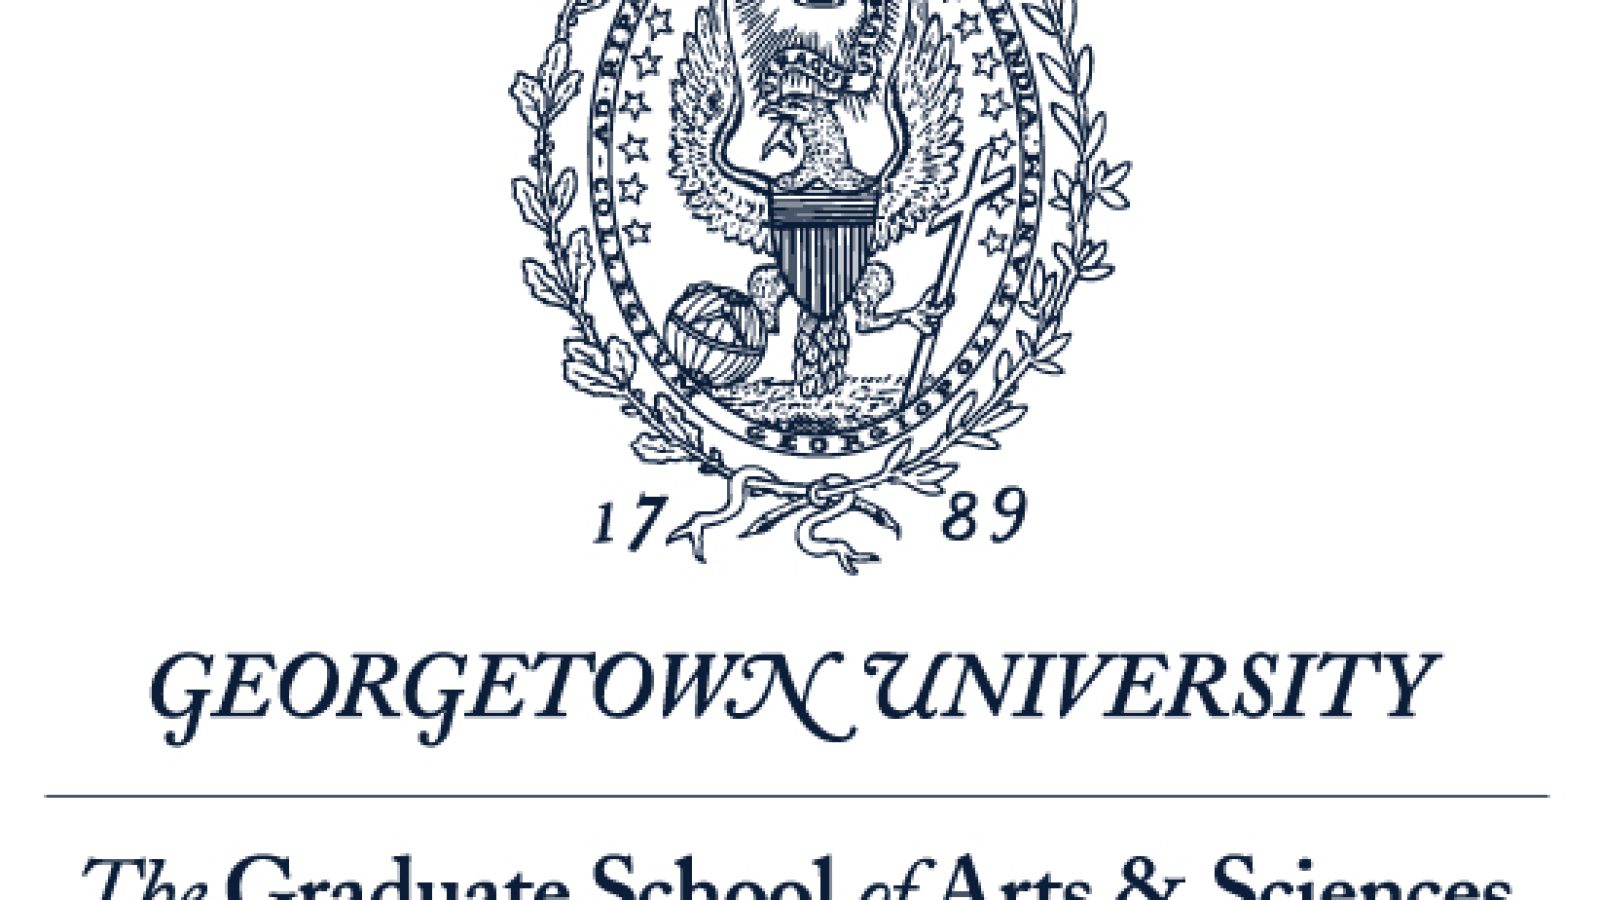 Master of Arts in Education Transformation logo over white background.